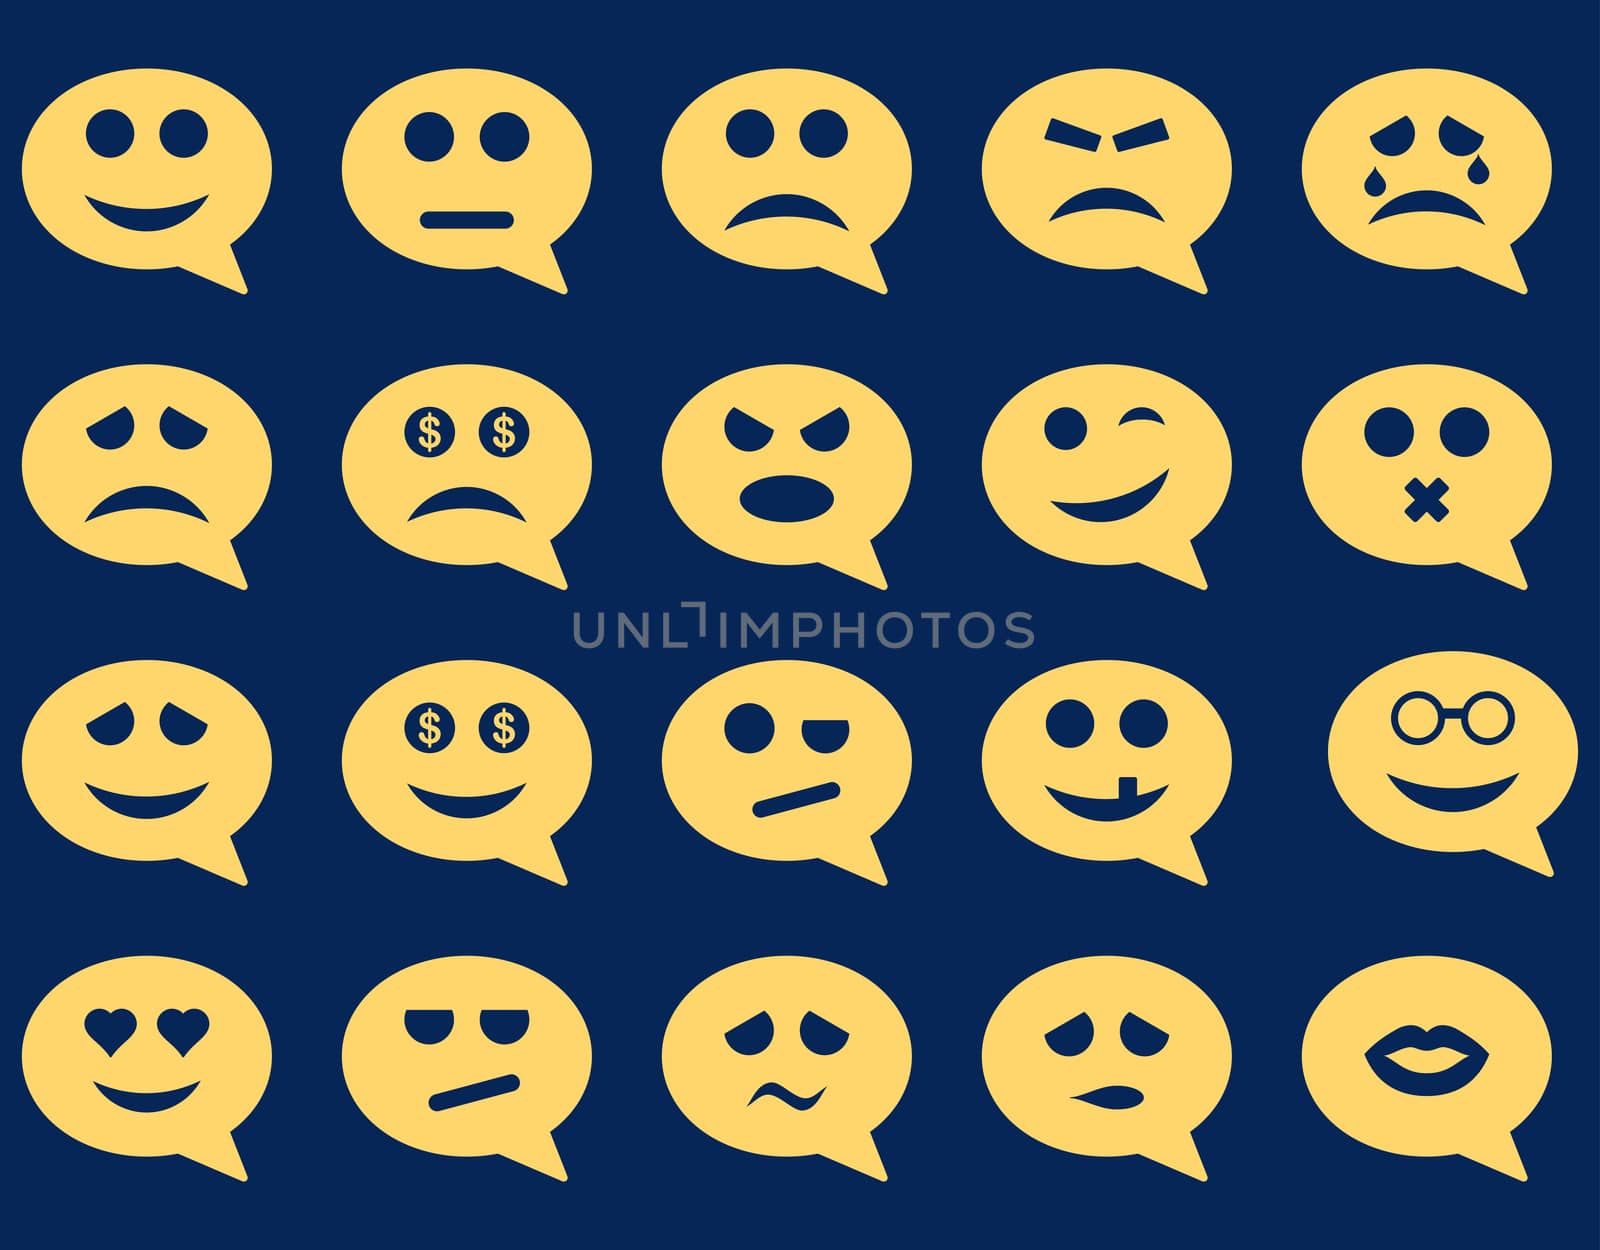 Chat emotion smile icons. Glyph set style is flat images, yellow symbols, isolated on a blue background.